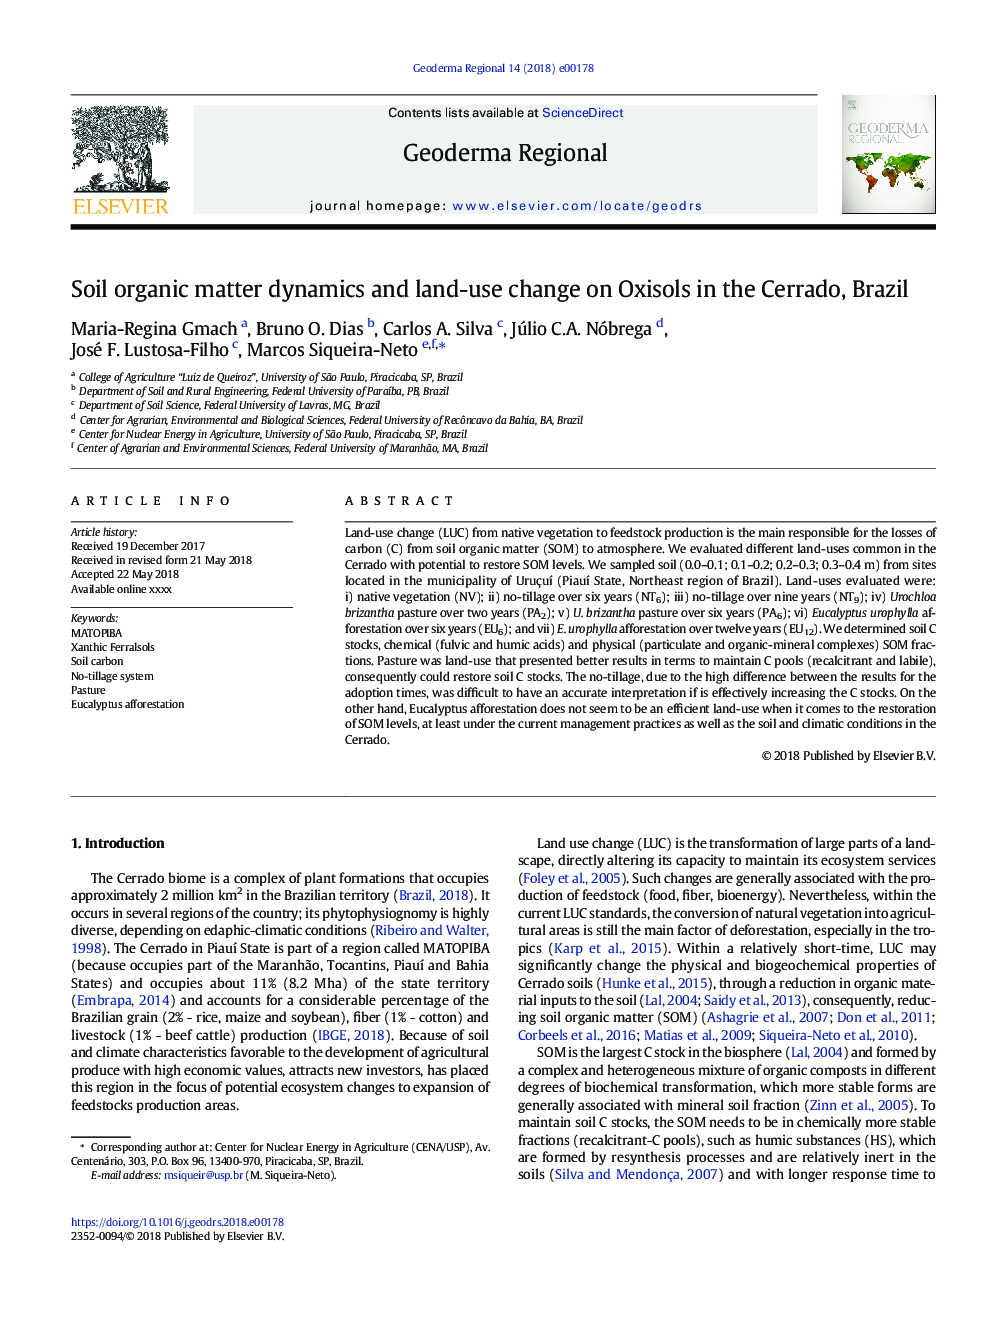 Soil organic matter dynamics and land-use change on Oxisols in the Cerrado, Brazil